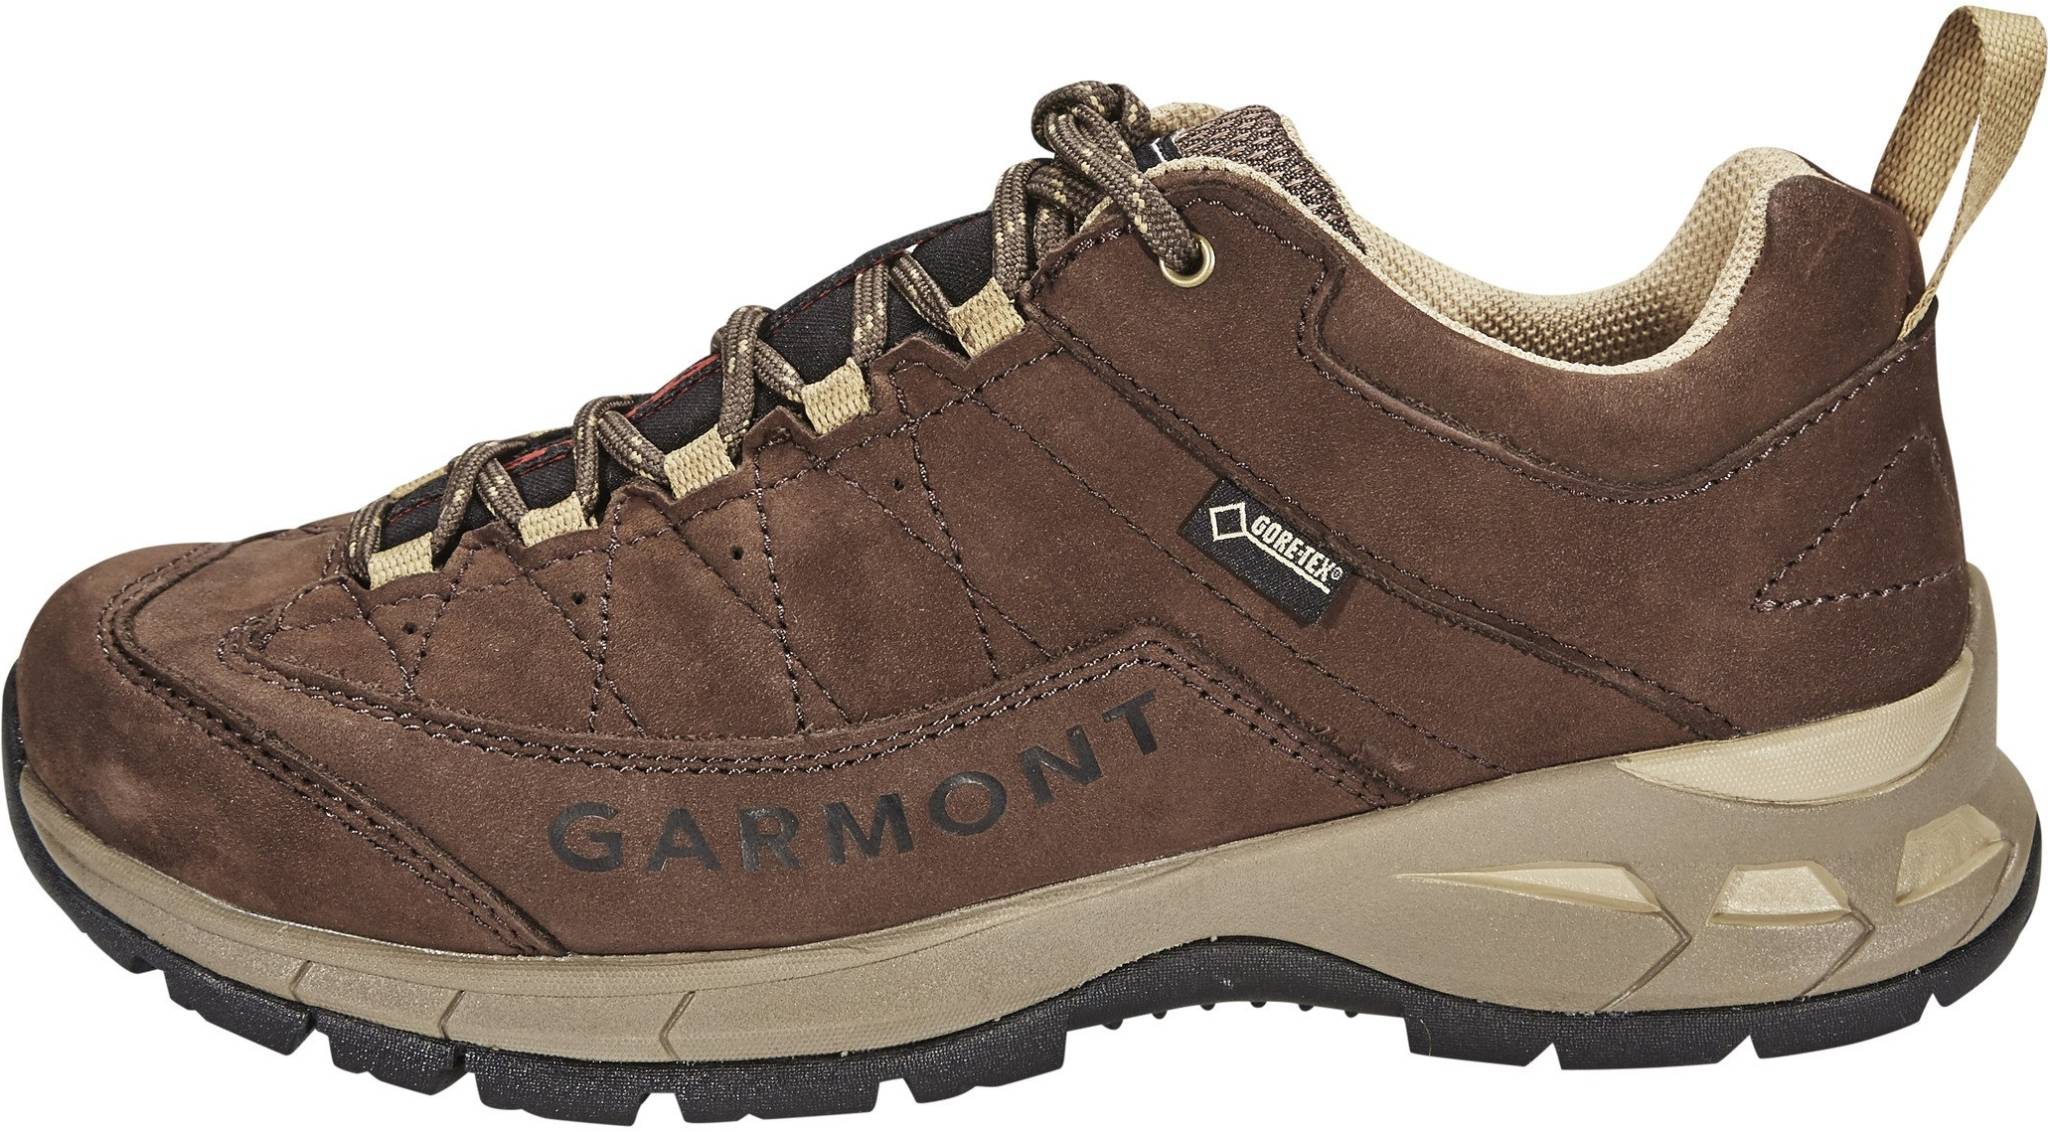 garmont trail running shoes